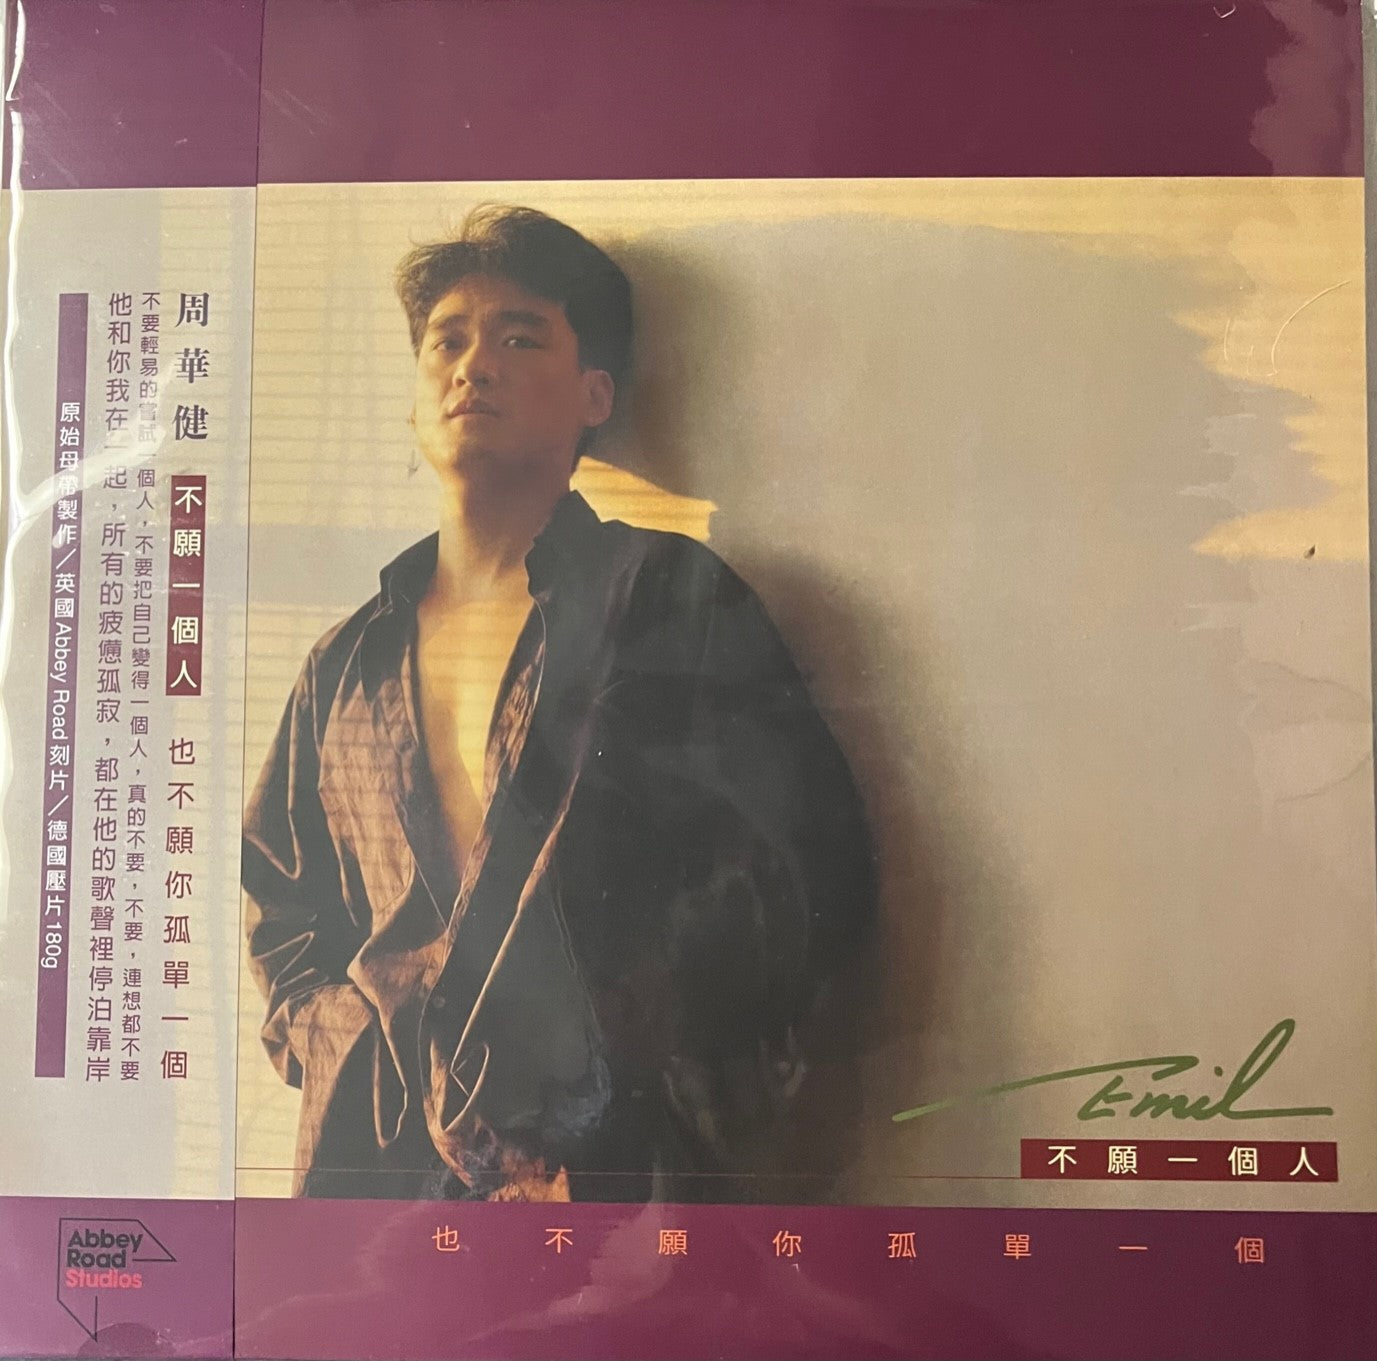 EMIL CHAU - 周華健 I DON'T WANT TO BE ALONE 不願一個人 (VINYL) MADE IN GERMANY